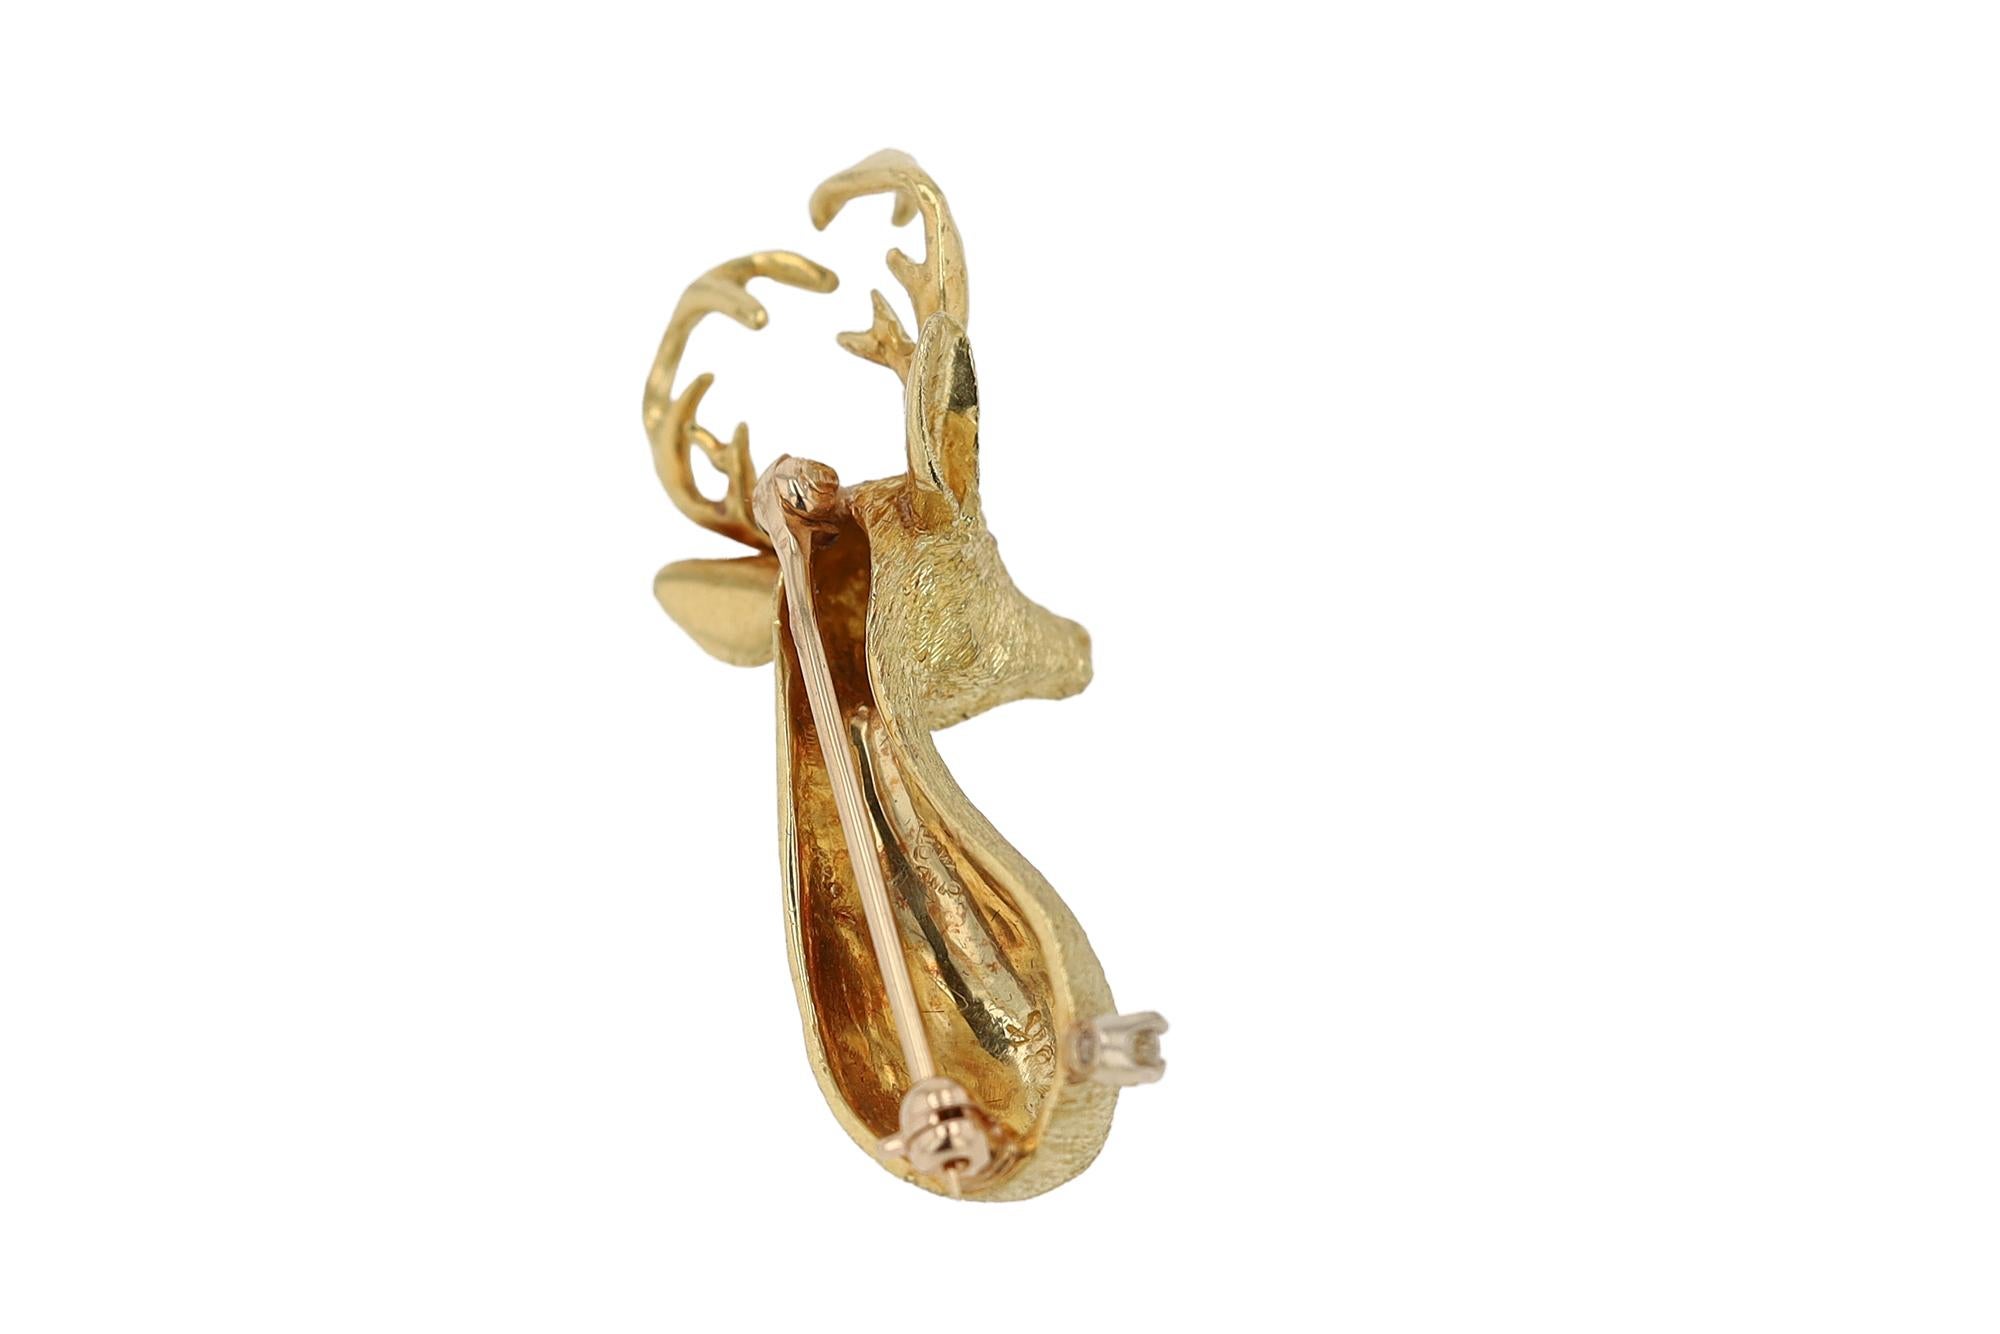 Add a touch of the outdoors to your wardrobe with this 18K deer pin. This  12 point buck is an en-deer-ing pin that comes alive with 2 pink sapphire eyes and finely textured gold resembling fur. This vintage estate brooch is a unique accessory and